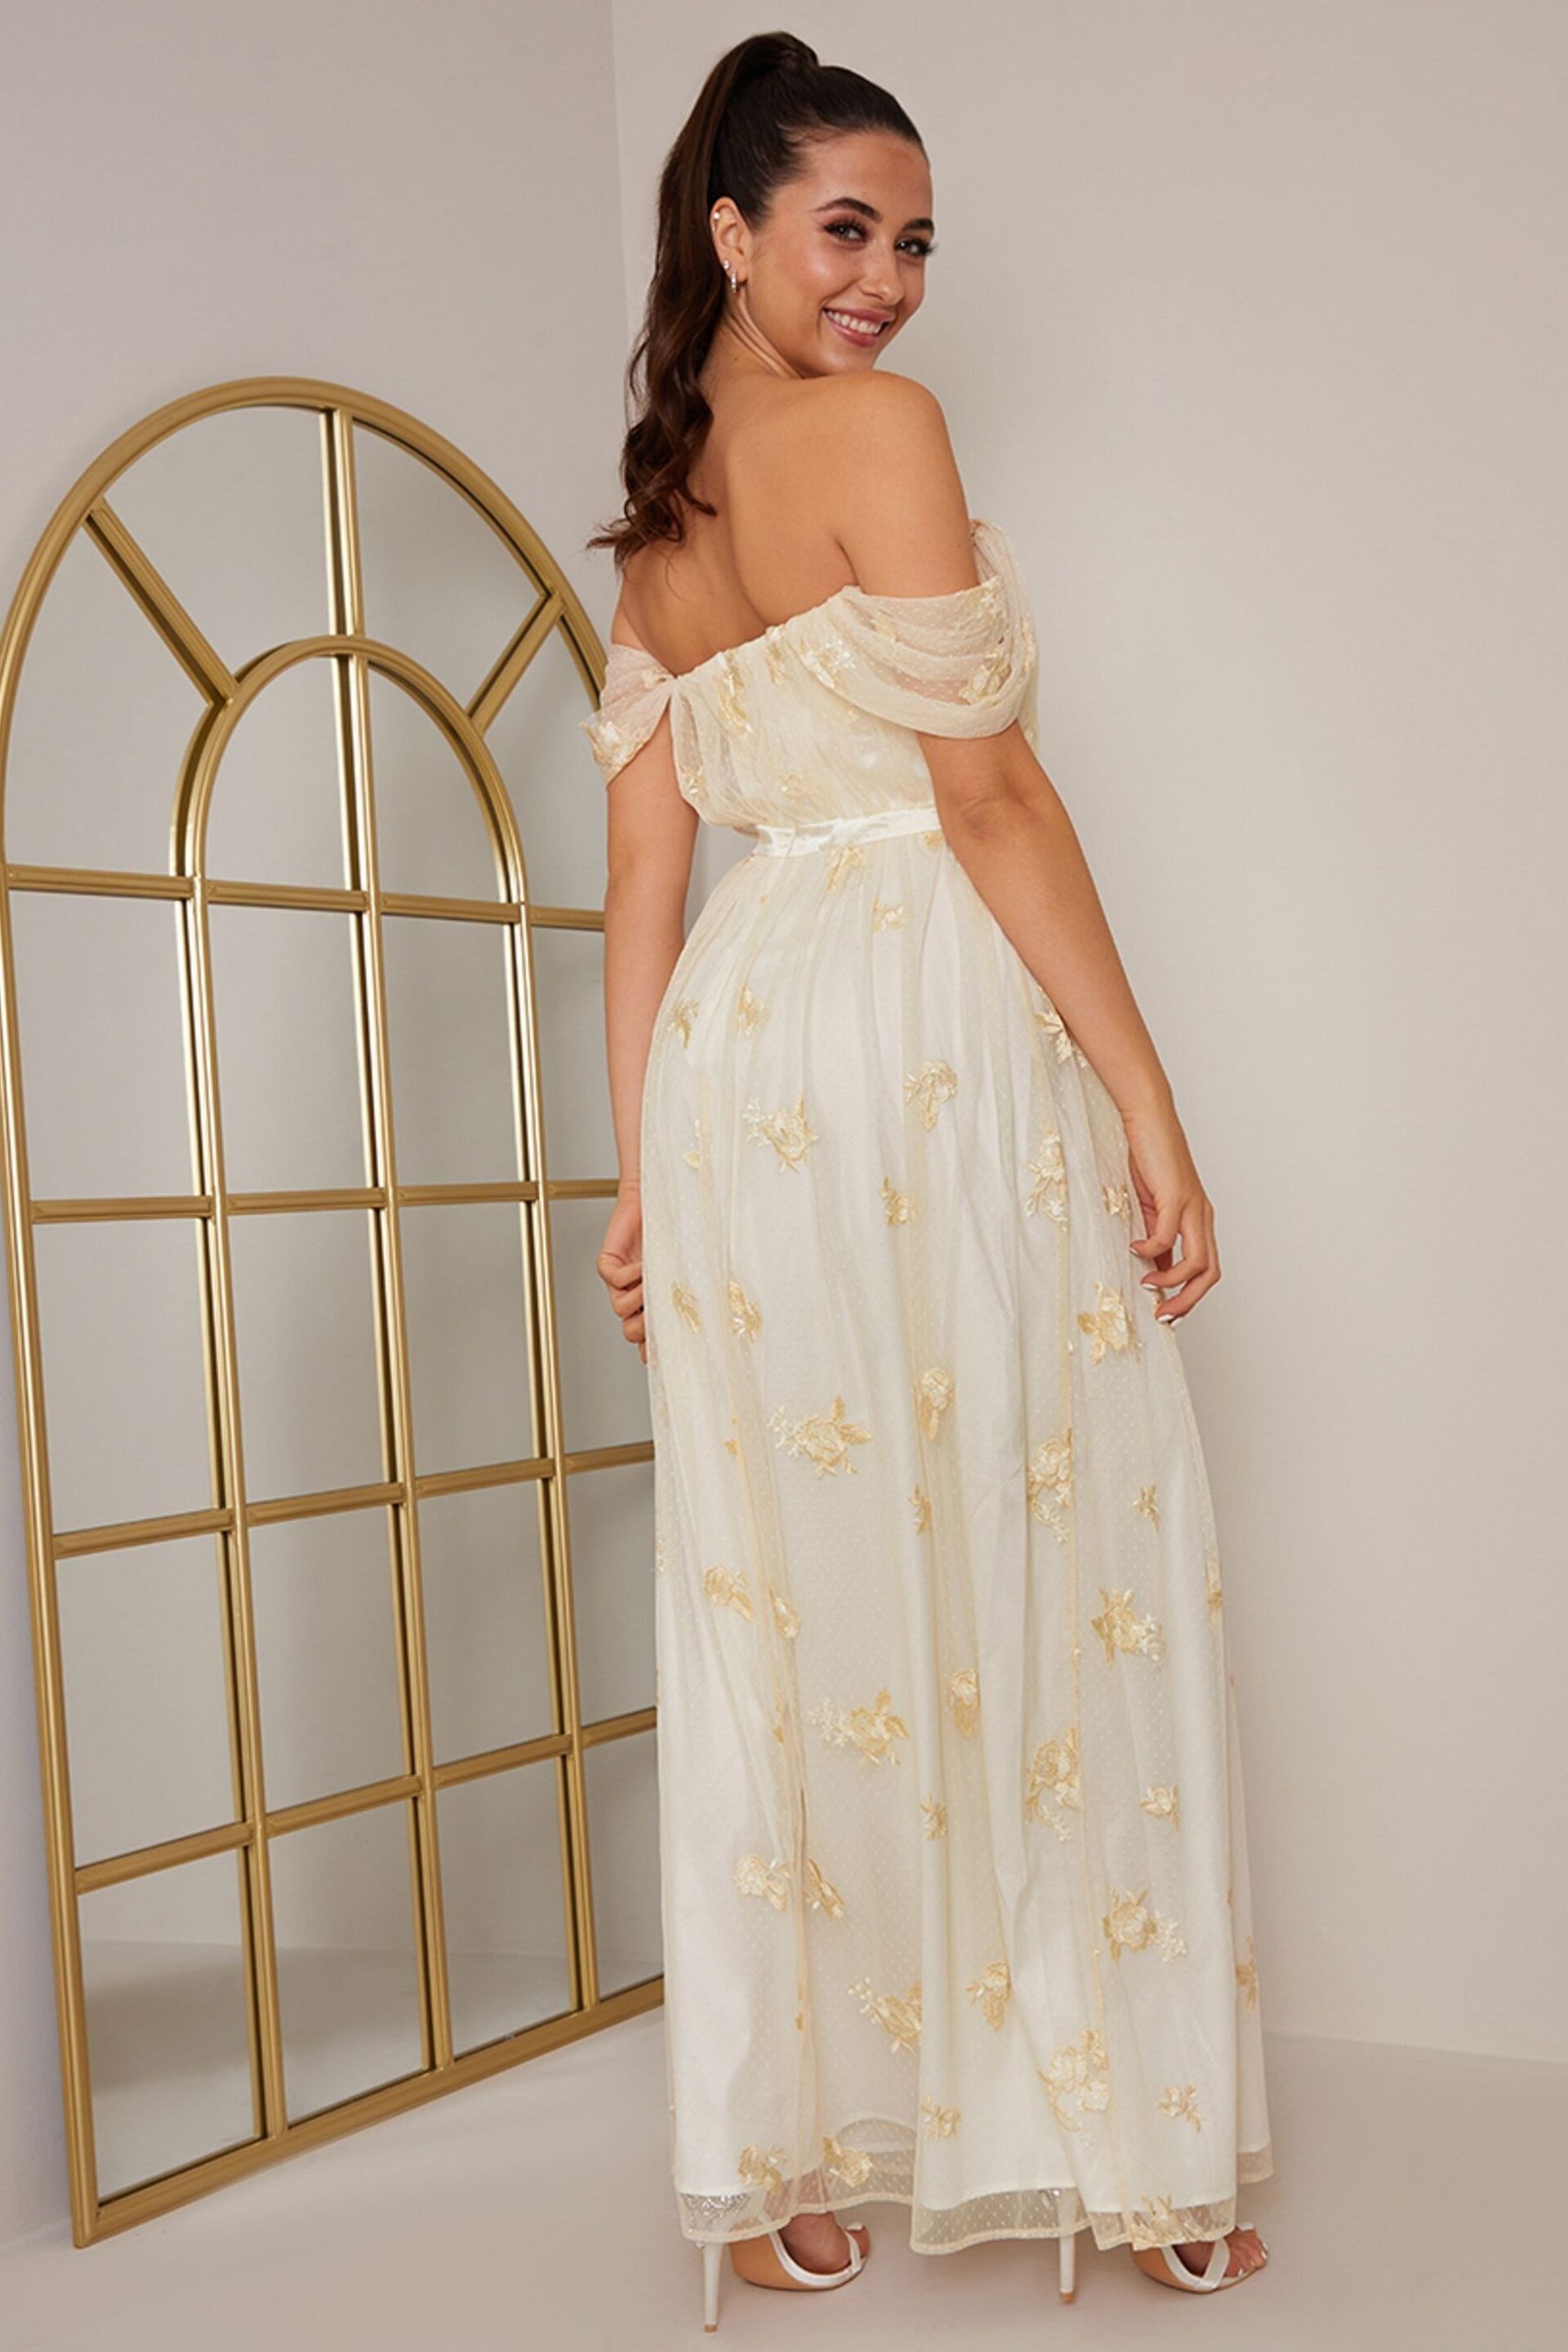 Chi Chi London Cream Bardot Embroidered Floral Dobby Lace Maxi Dress - Image 2 of 5